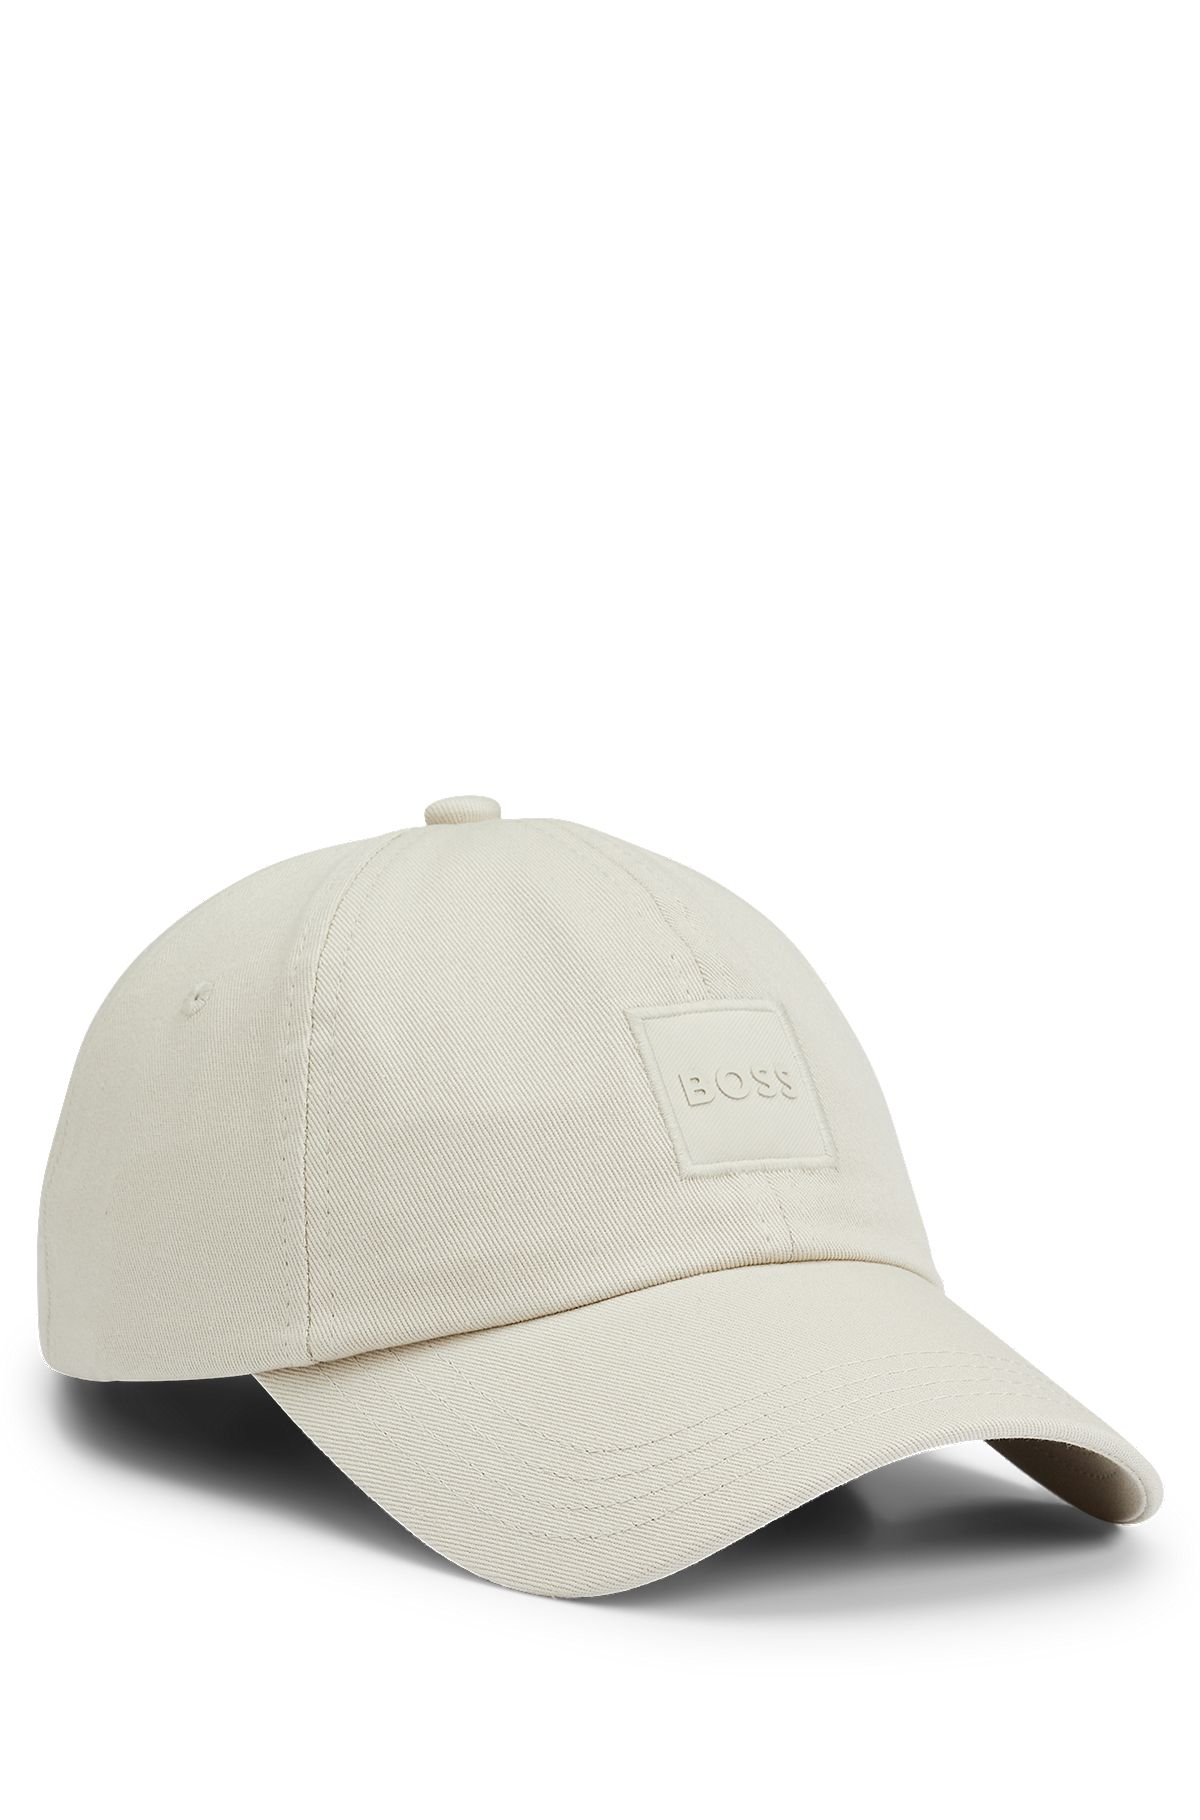 patch with - BOSS tonal Cotton-twill logo cap